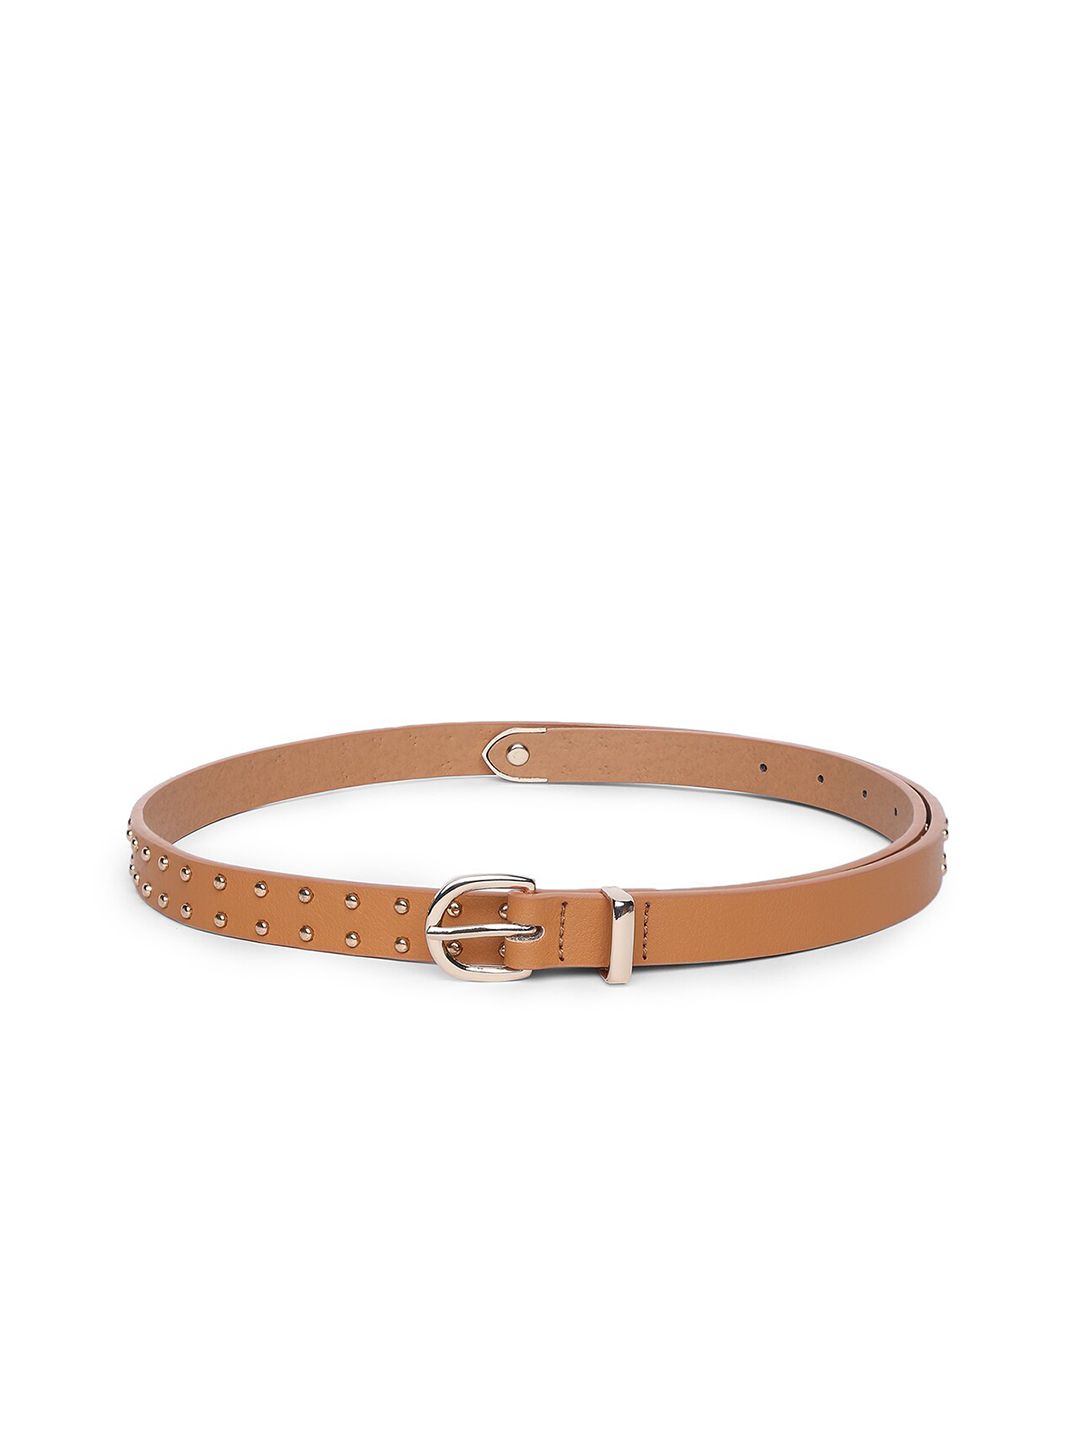 Forever Glam by Pantaloons Women Tan Brown Embellished Belt Price in India